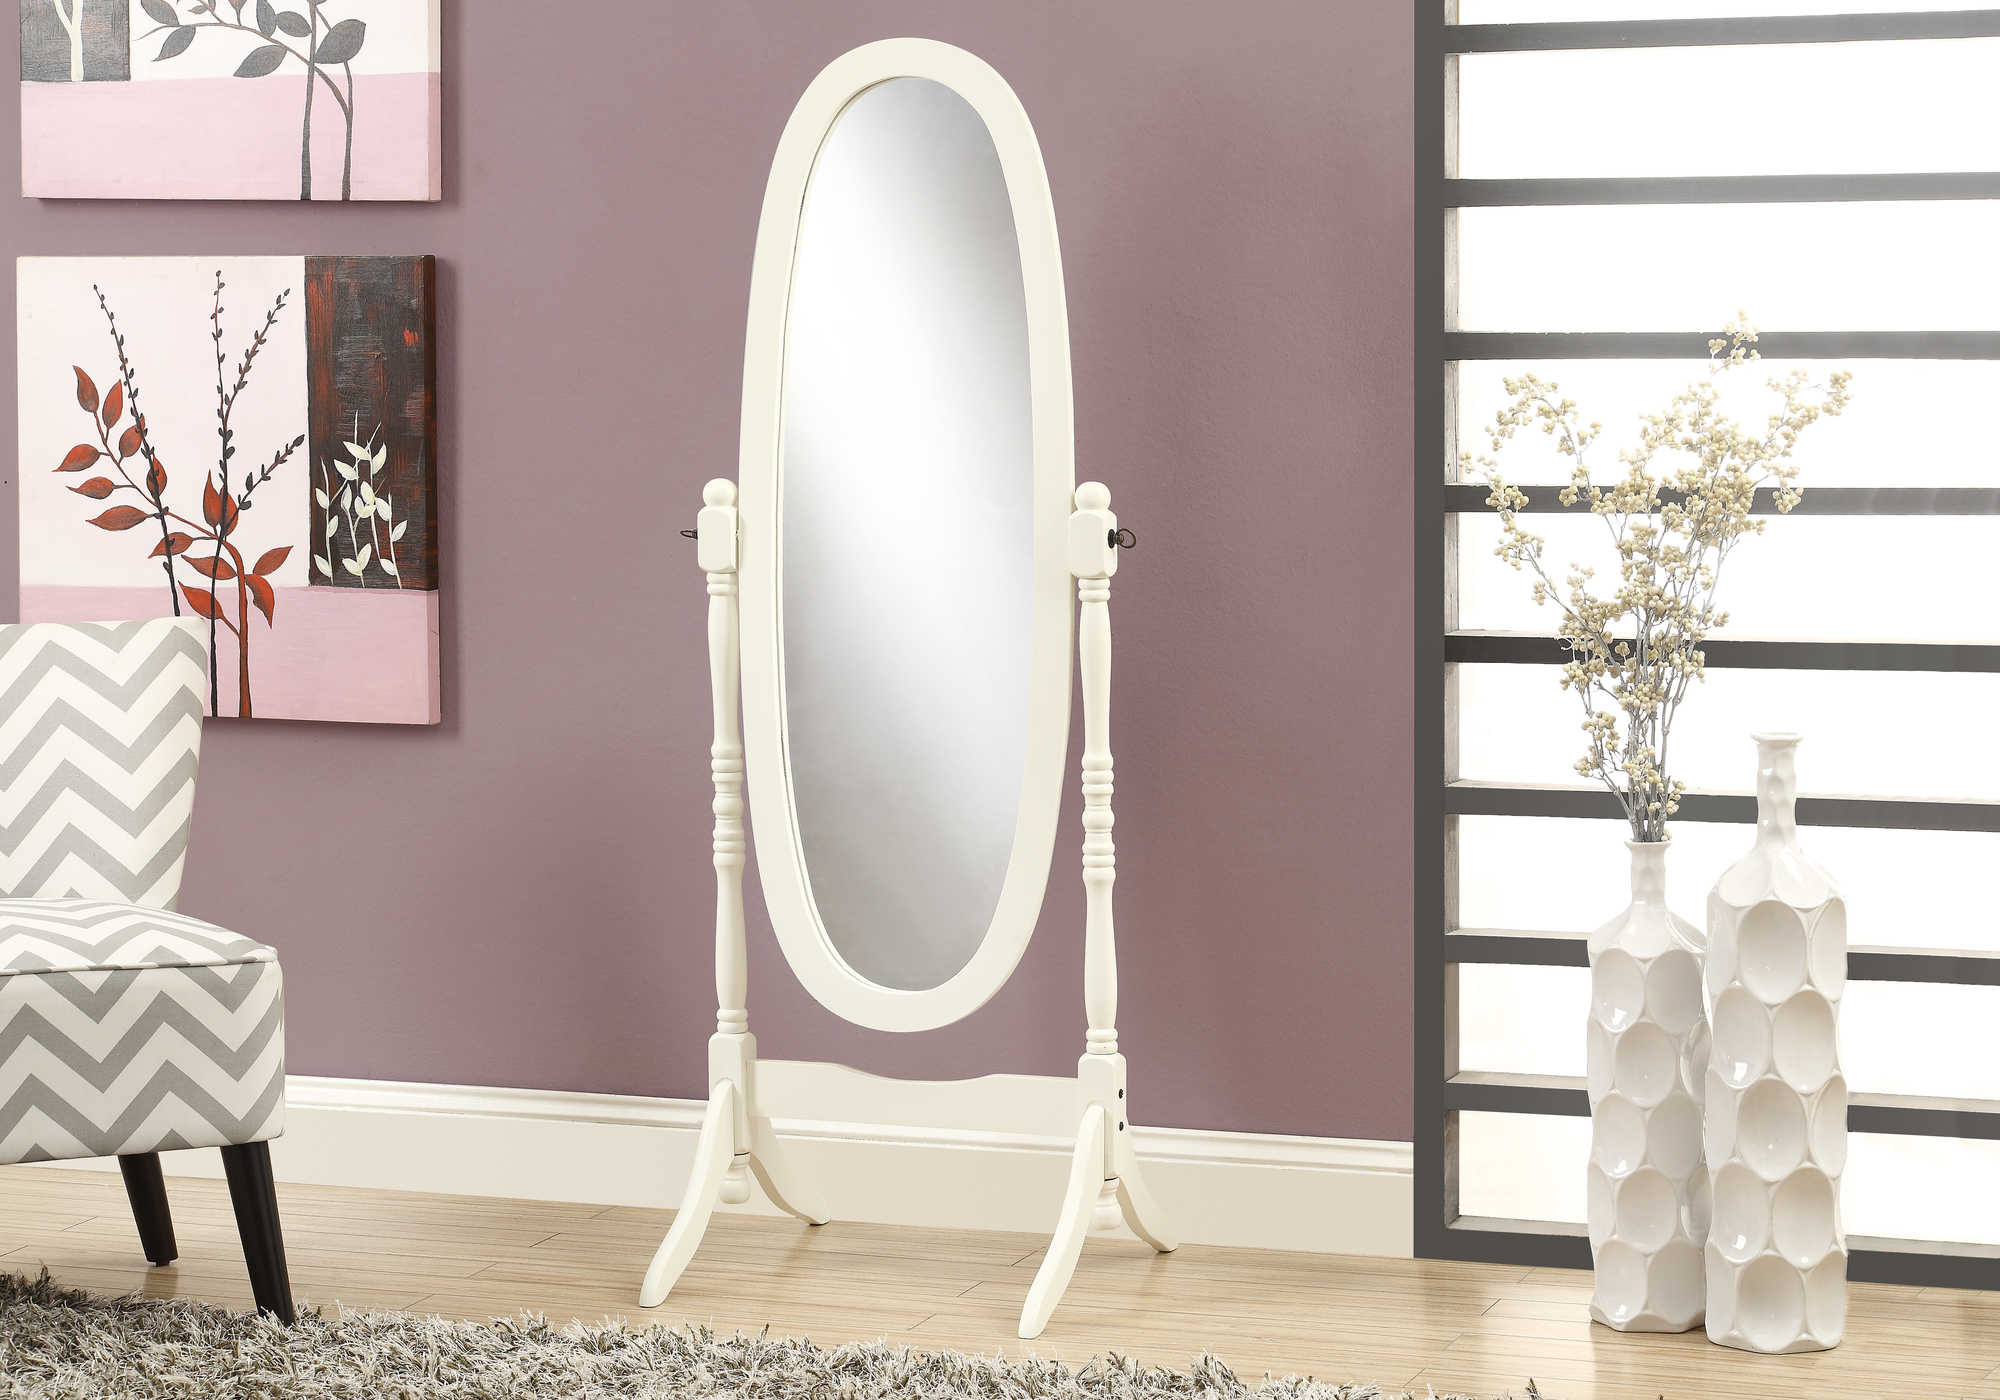 BEDROOM MIRROR - 59"H / ANTIQUE WHITE OVAL WOOD FRAME 